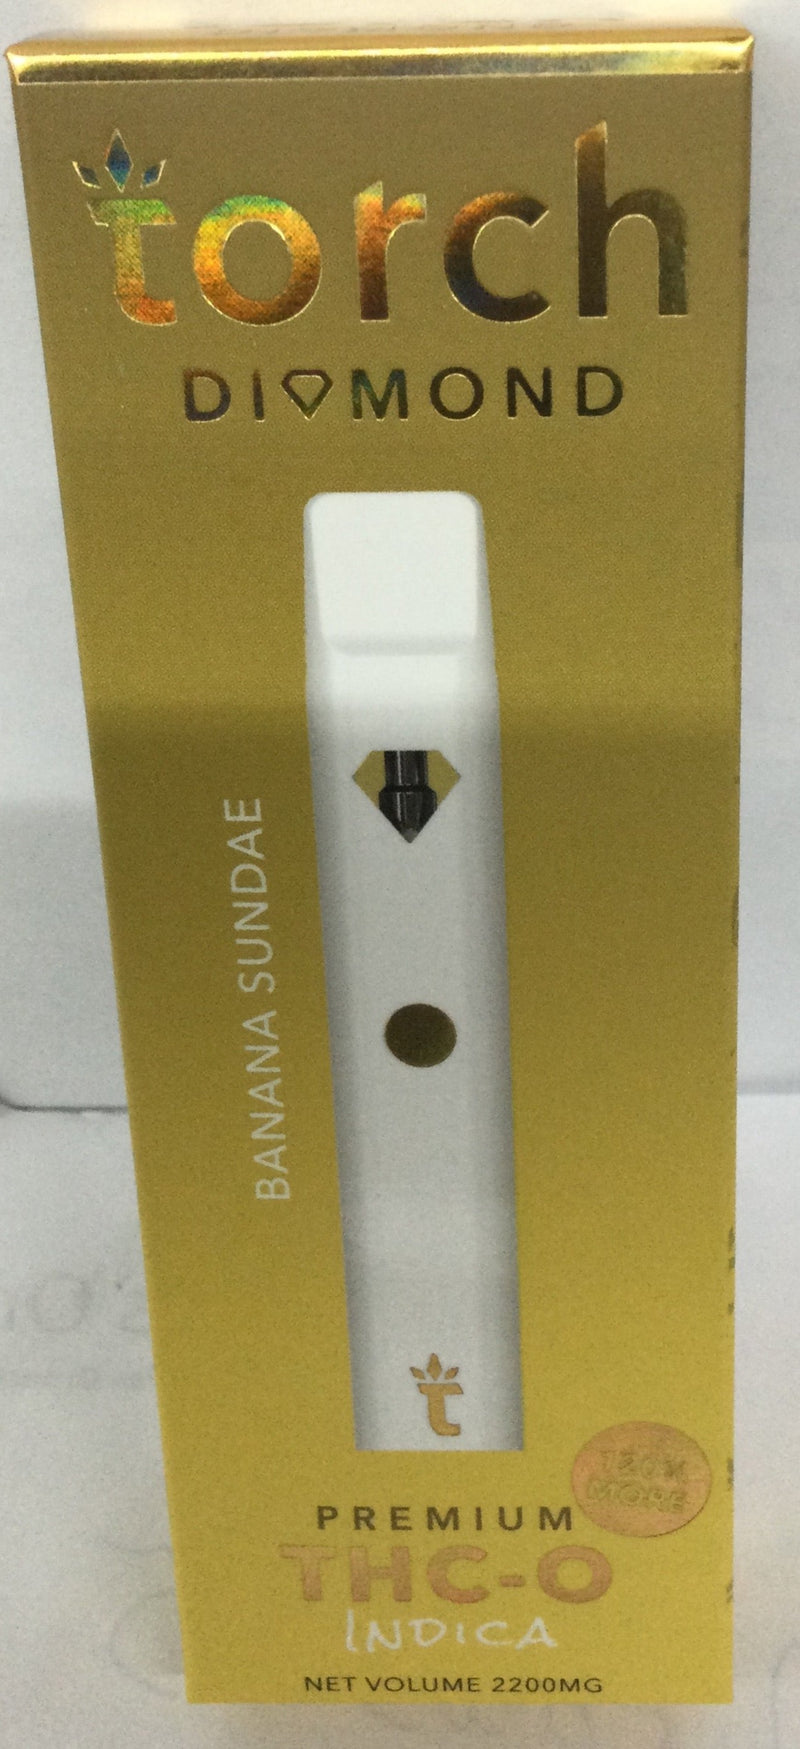 Torch Diamond THC-O Rechargeable 2.2G